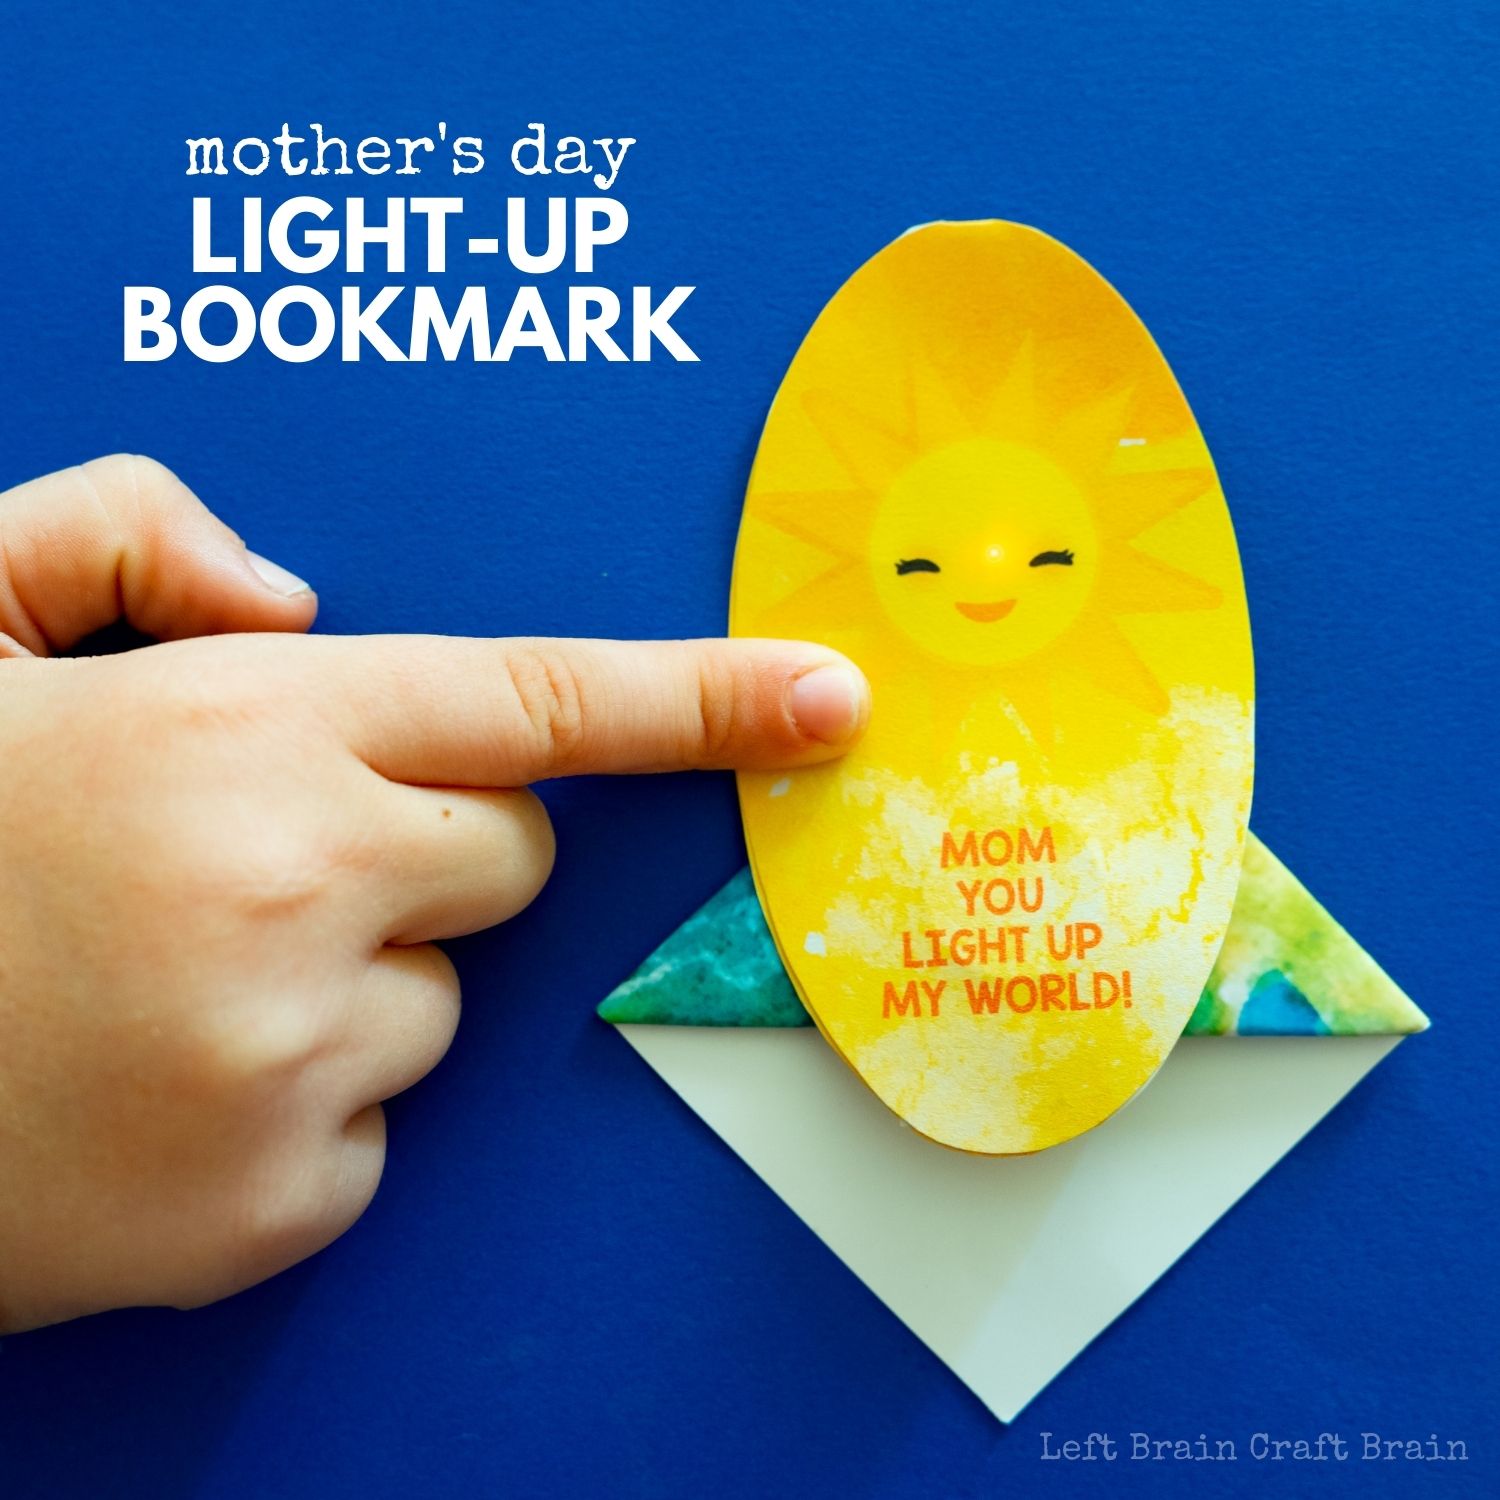 Make mom a unique gift by crafting this Mother's Day Light-up Bookmark for her. It's a great STEM project to learn about electricity and origami.